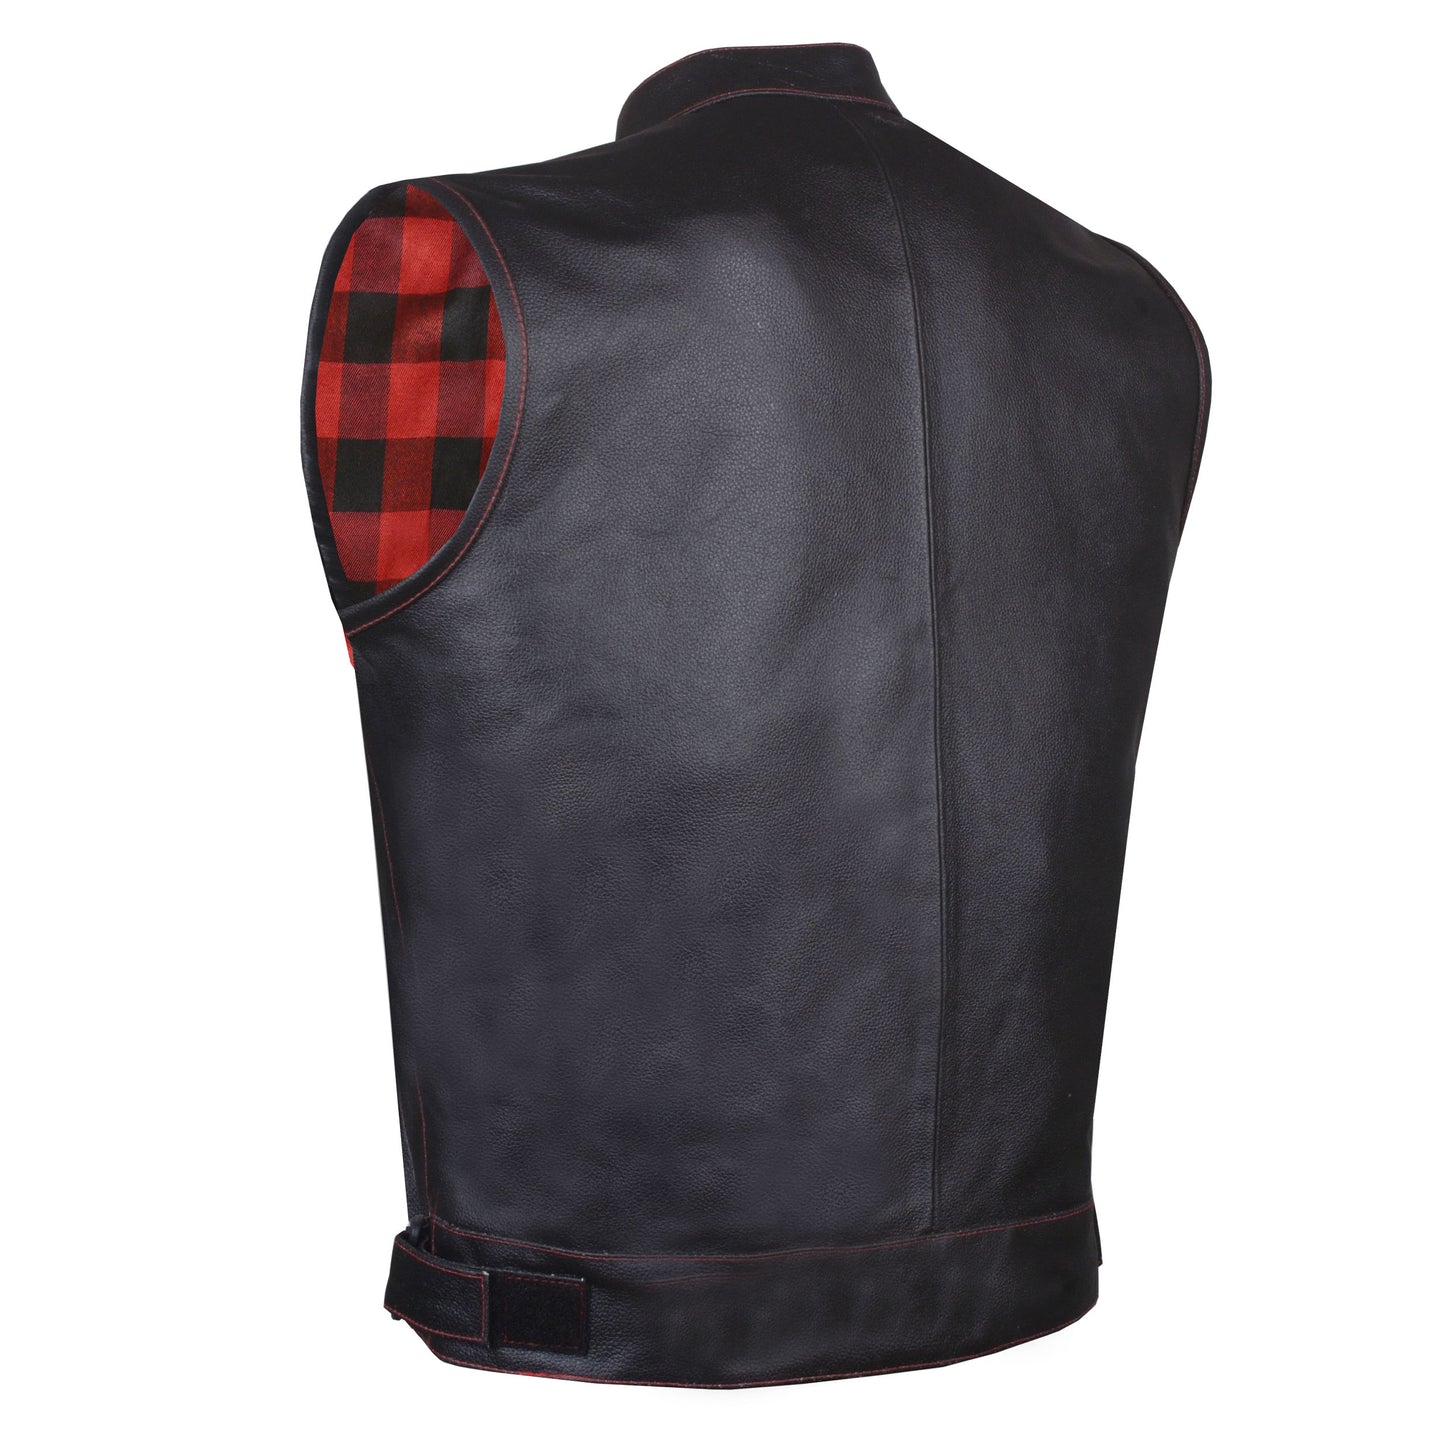 Men's ARMOR Leather SOA Anarchy Motorcycle Biker Club Concealed Carry Vest Flannel Red